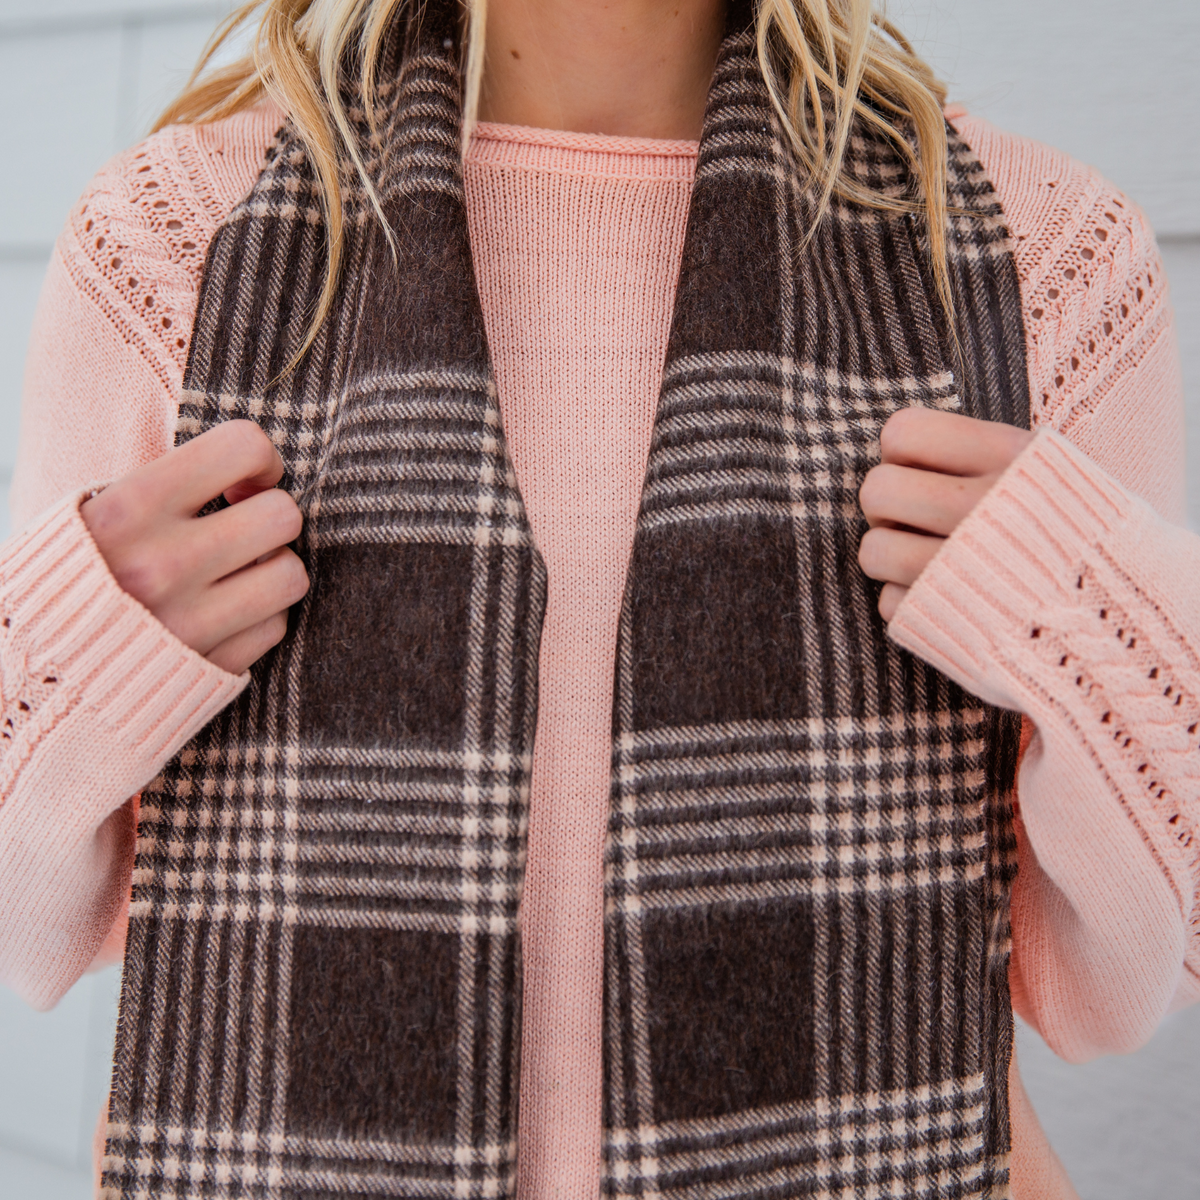 A close up photo of a woman in a pink woven sweater and an Alpacas of Montana soft stylish women&#39;s fashion comfortable cozy cute warm alpaca wool latte brown and chocolate brown plaid pattern scarf with tassels.